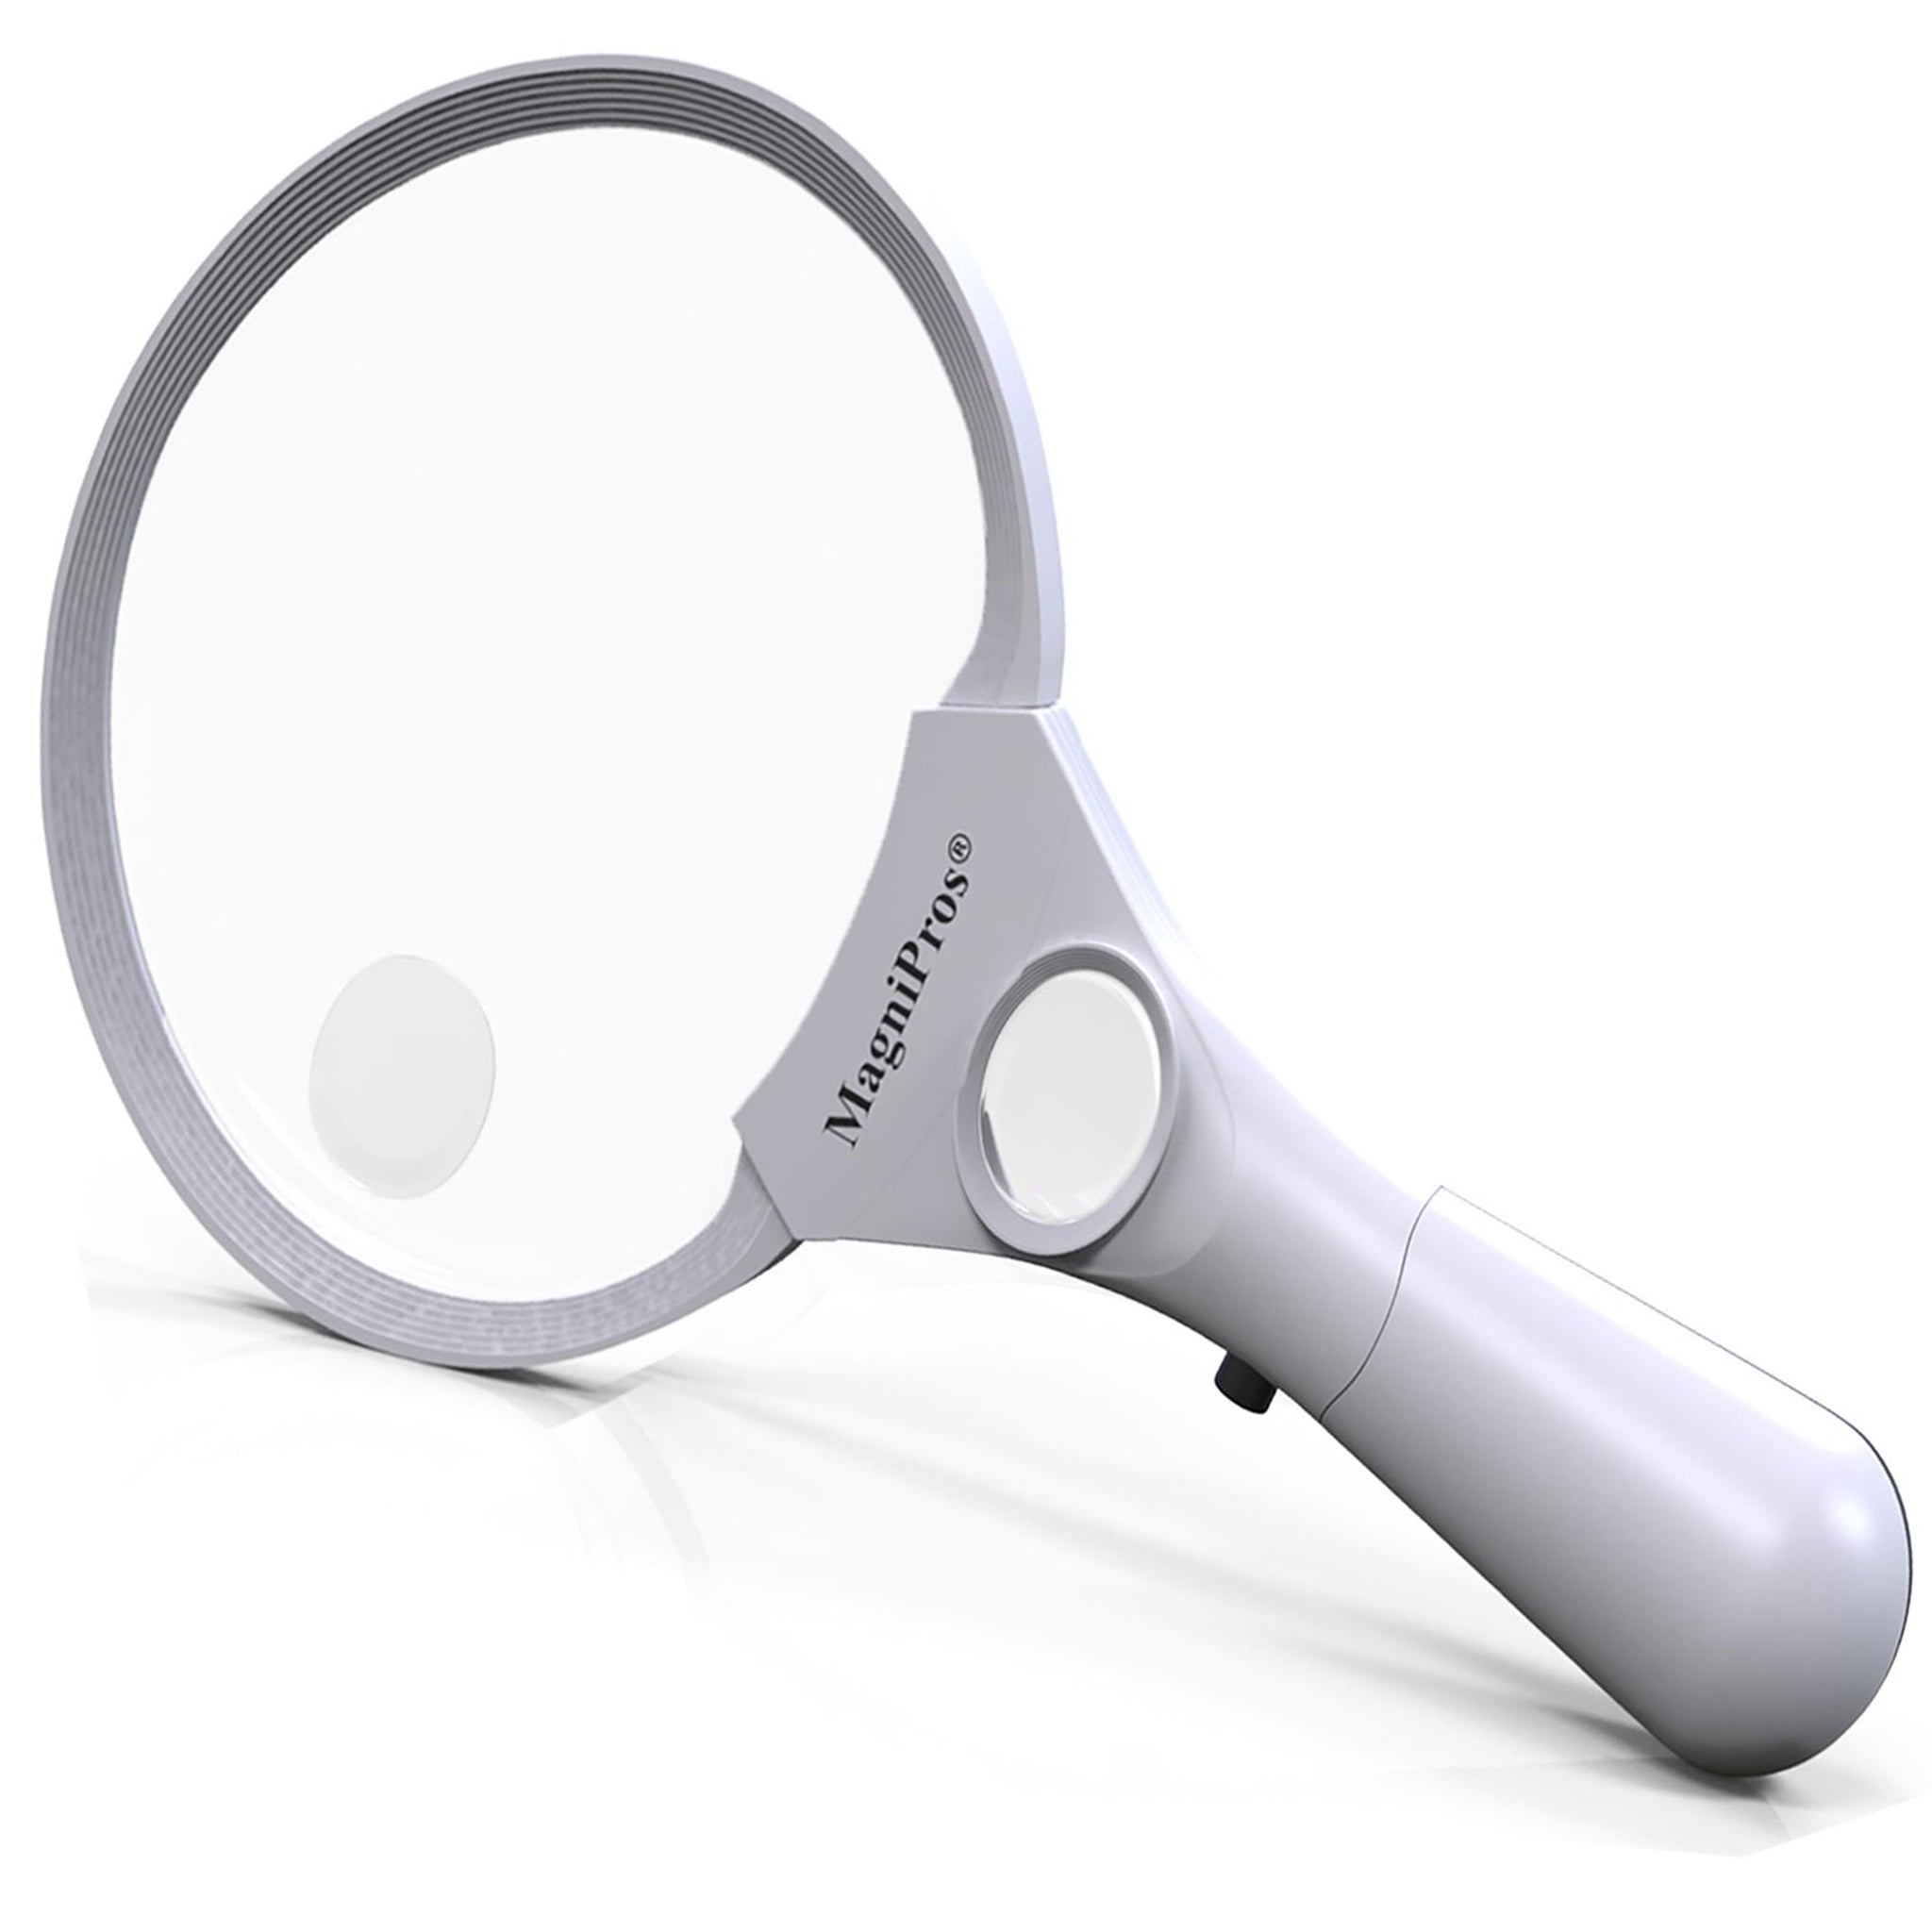  Jewelers Magnifying Glass with Light Bundle Includes